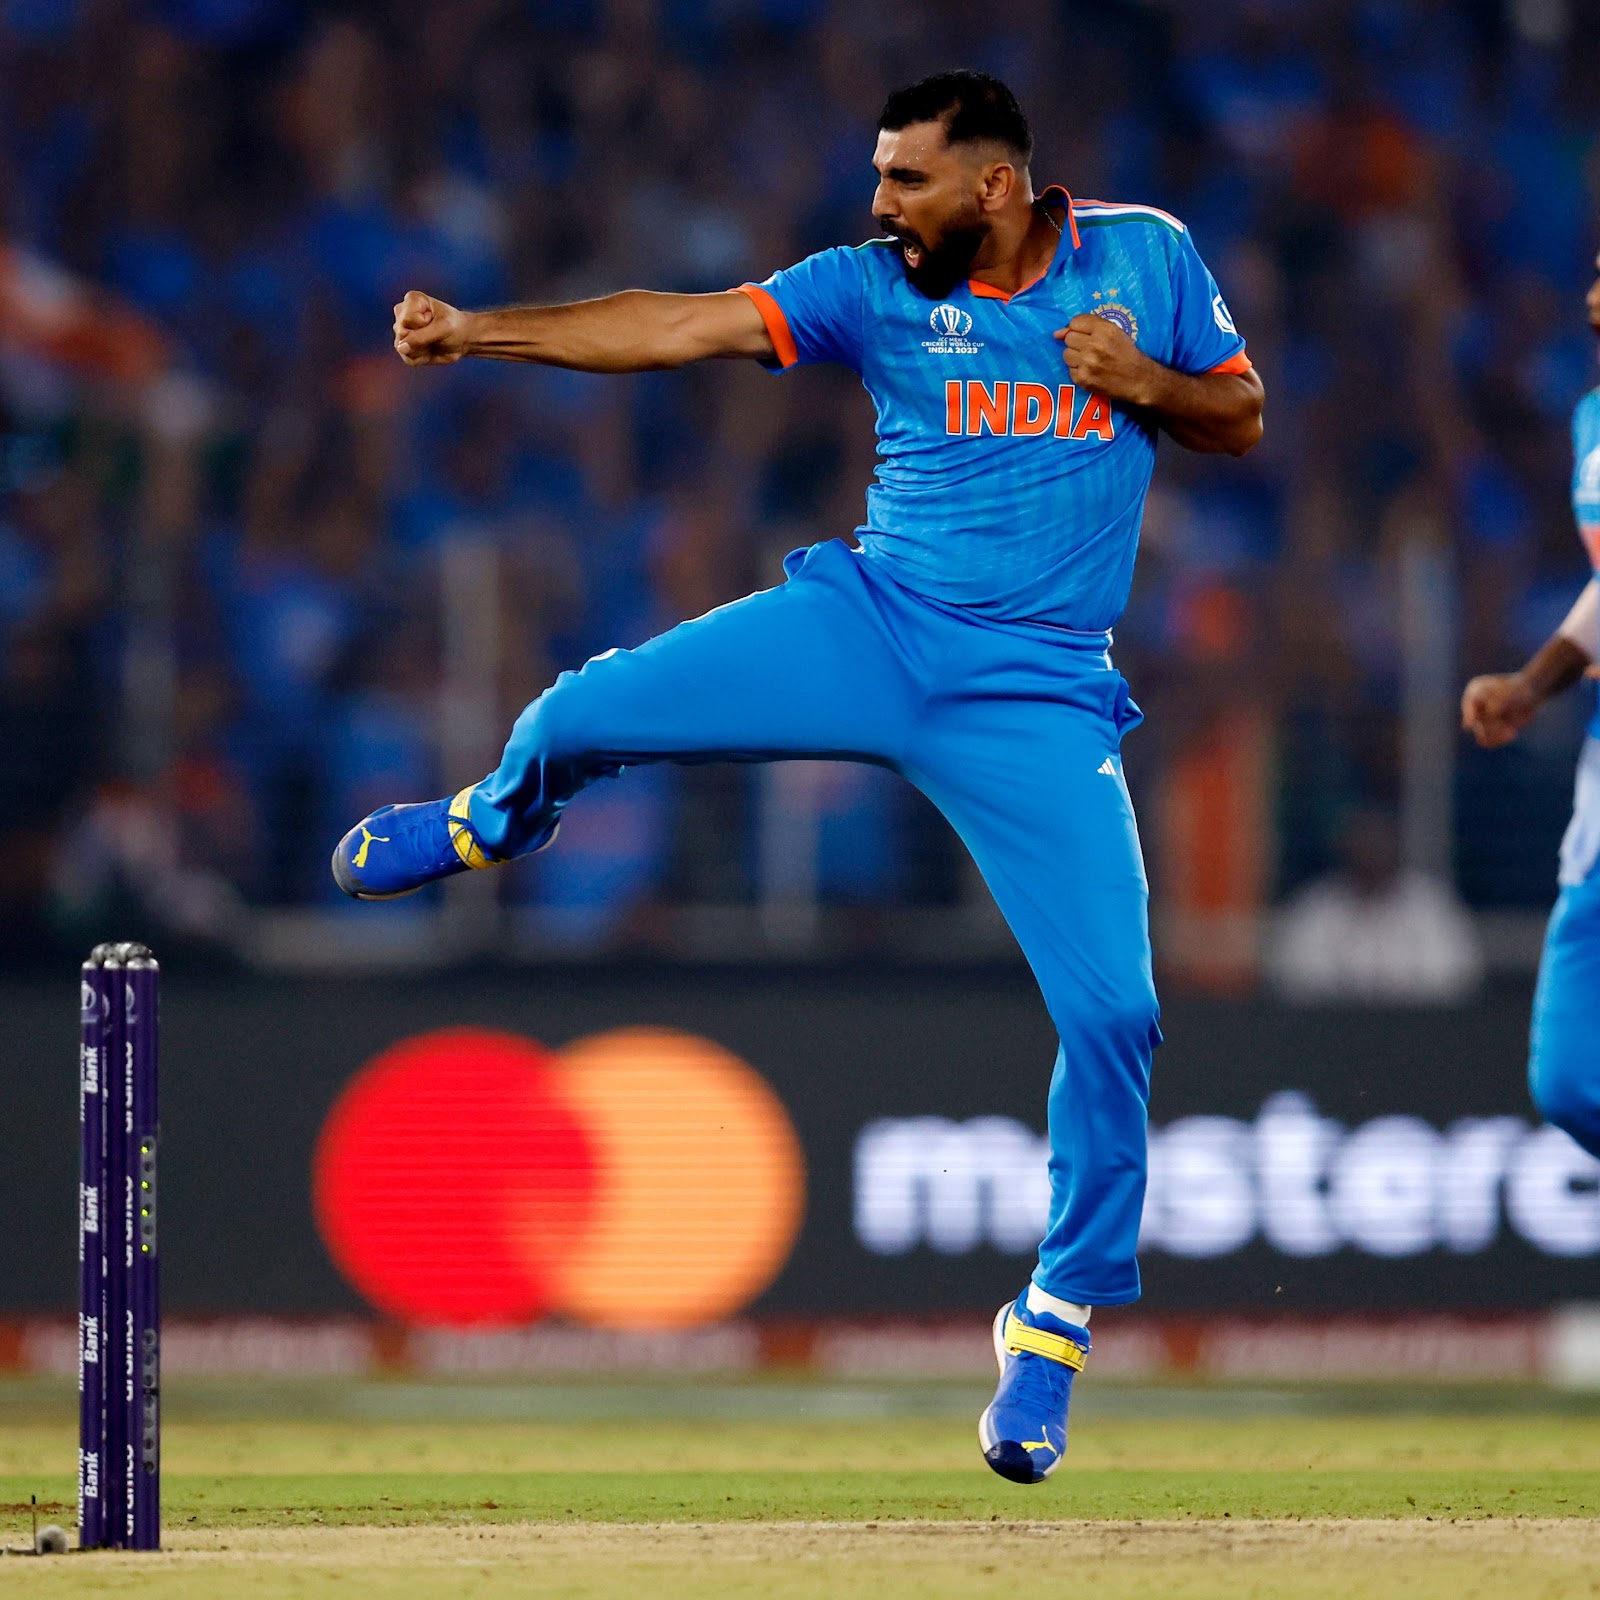 Shami was flying at the World Cup